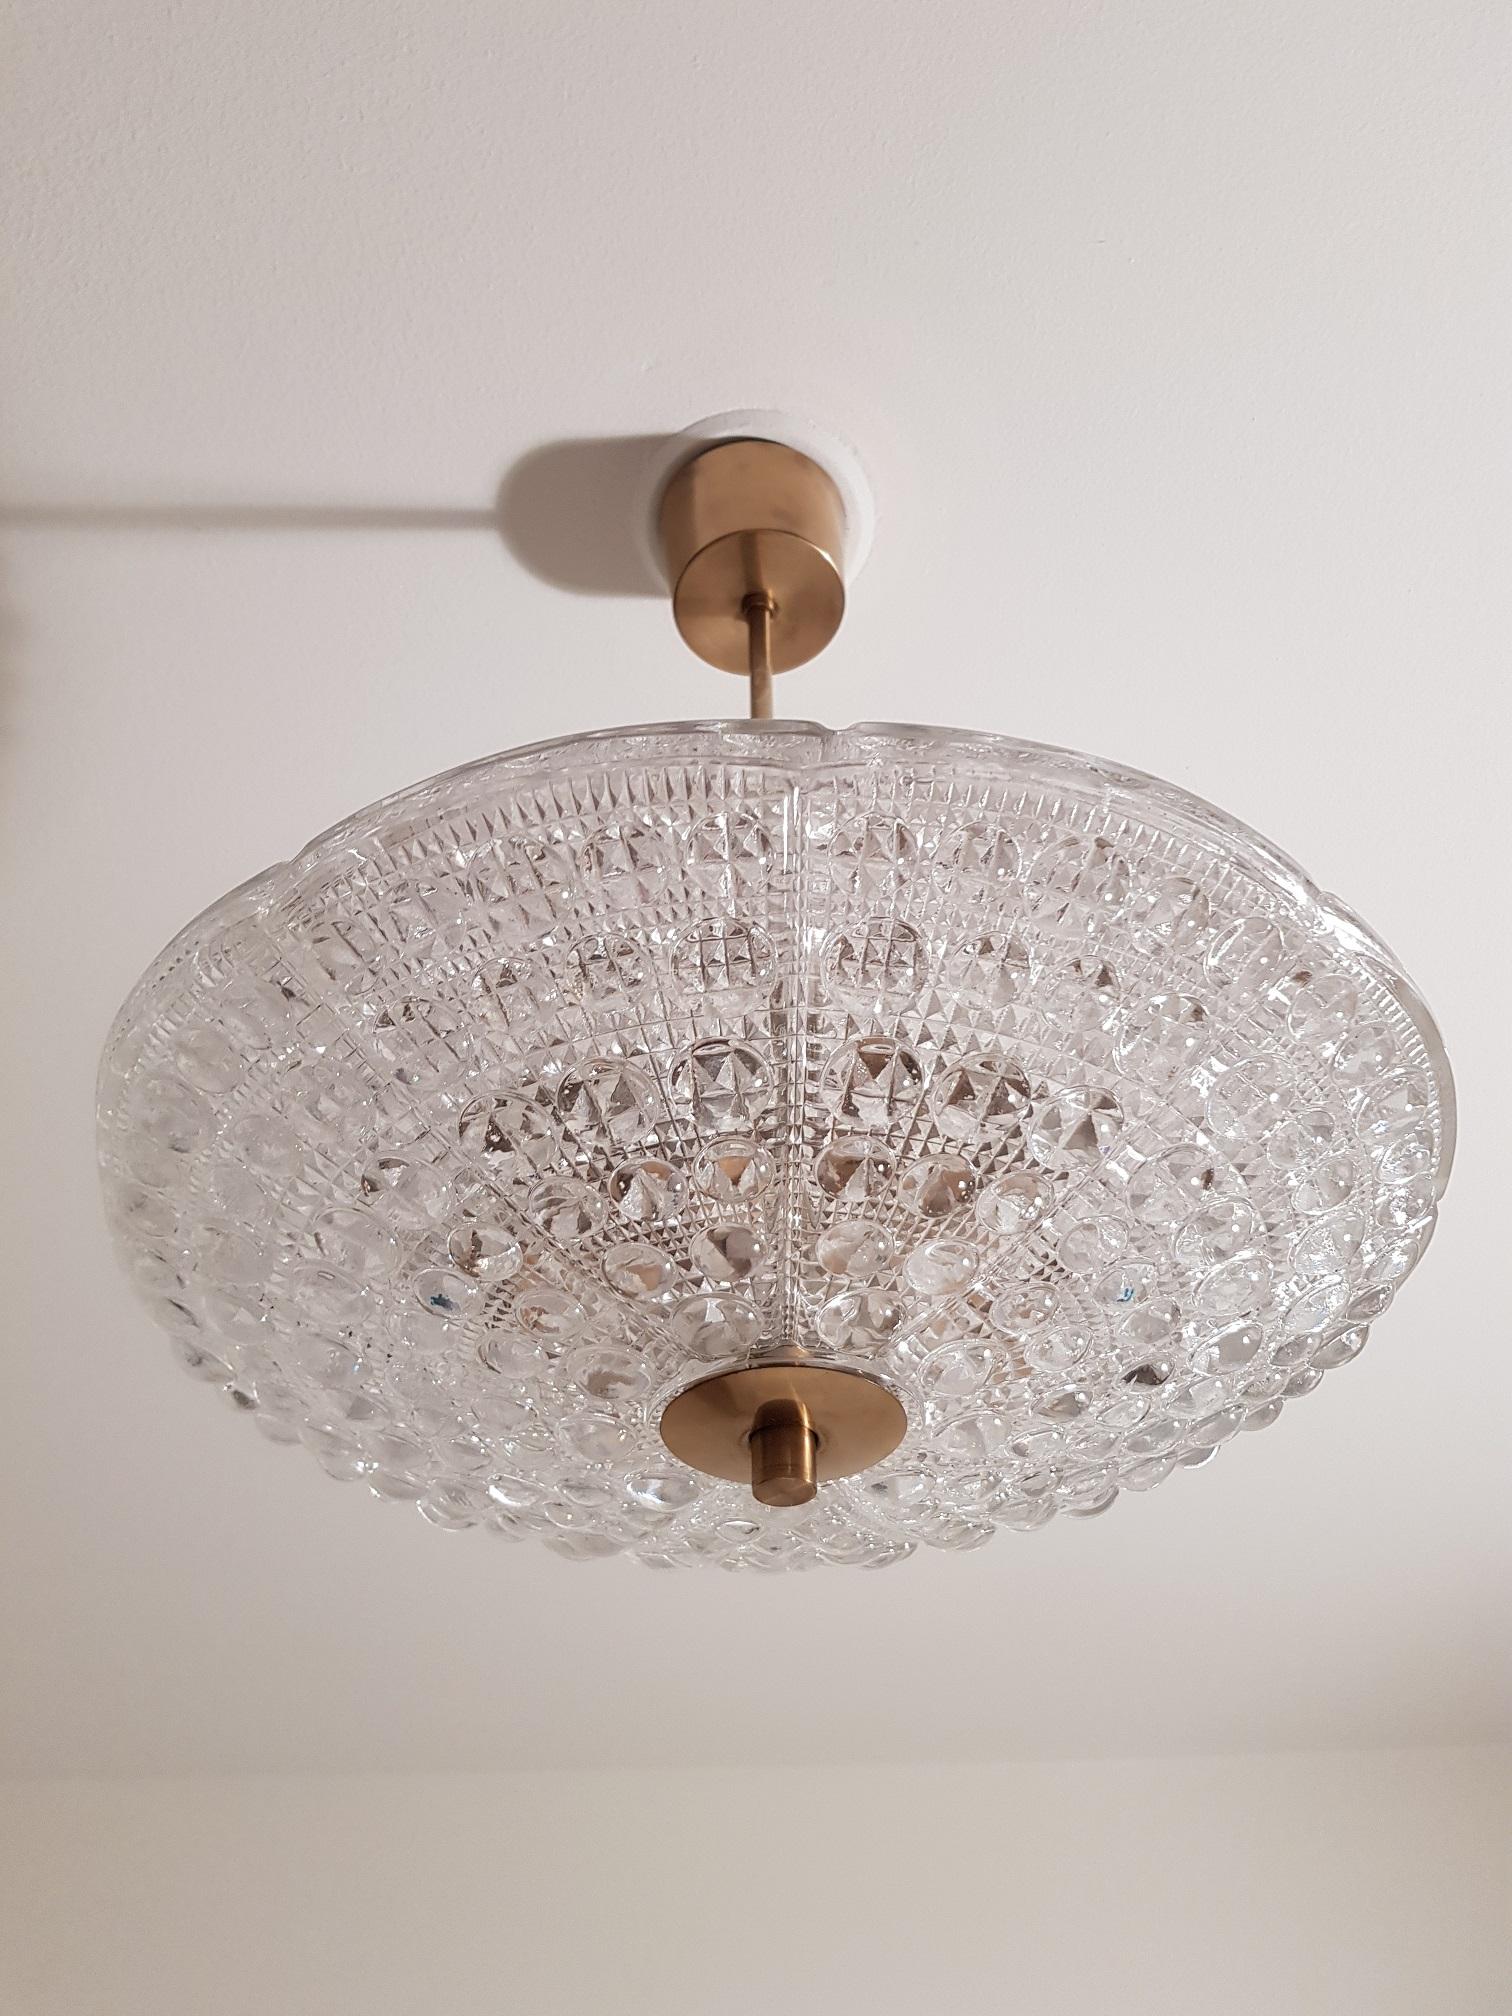 Carl Fagerlund Dual Disc Chandelier Brass and Glass 1960s, Orrefors Sweden In Good Condition For Sale In Limhamn, SE